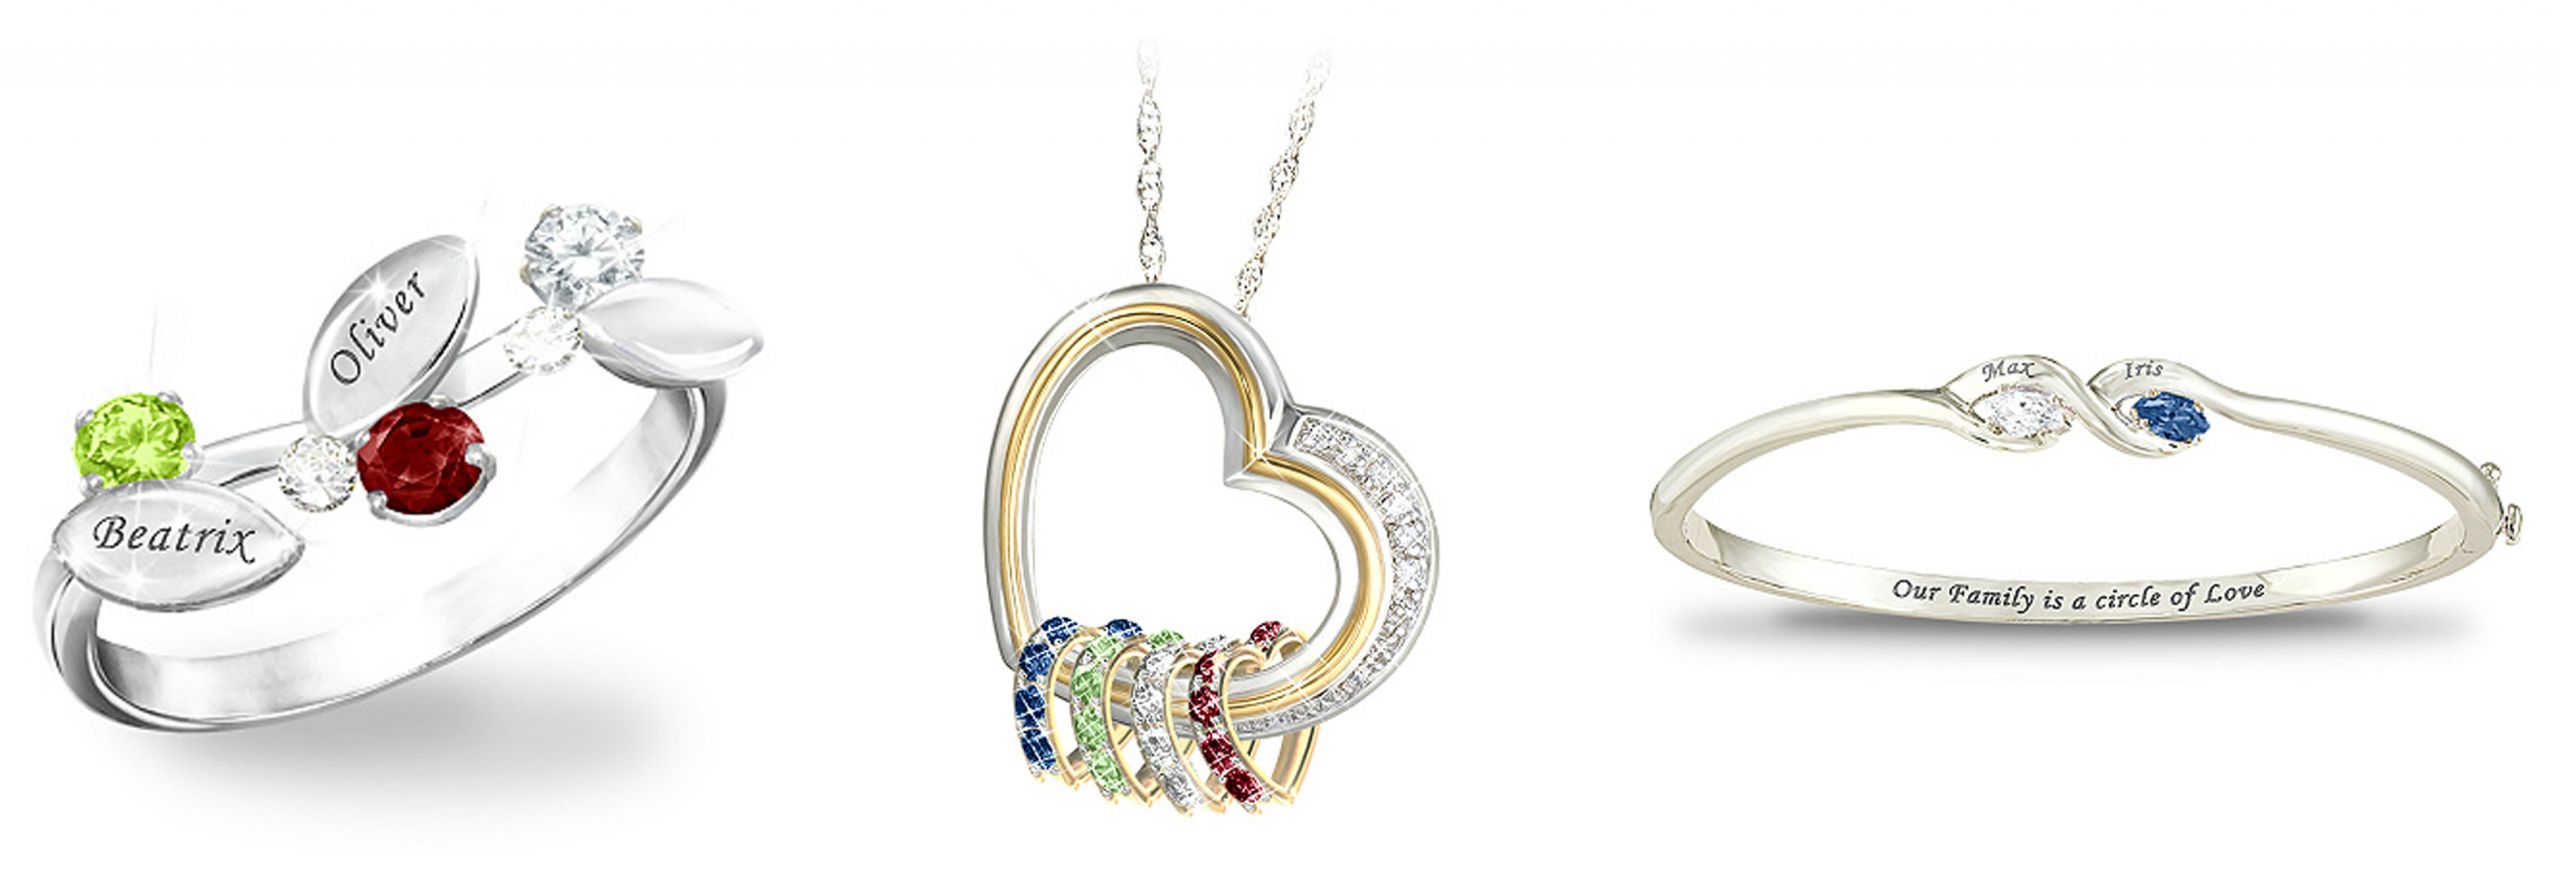 Mothers Day Gifts Jewelry
 The Best Deals to Buy in April